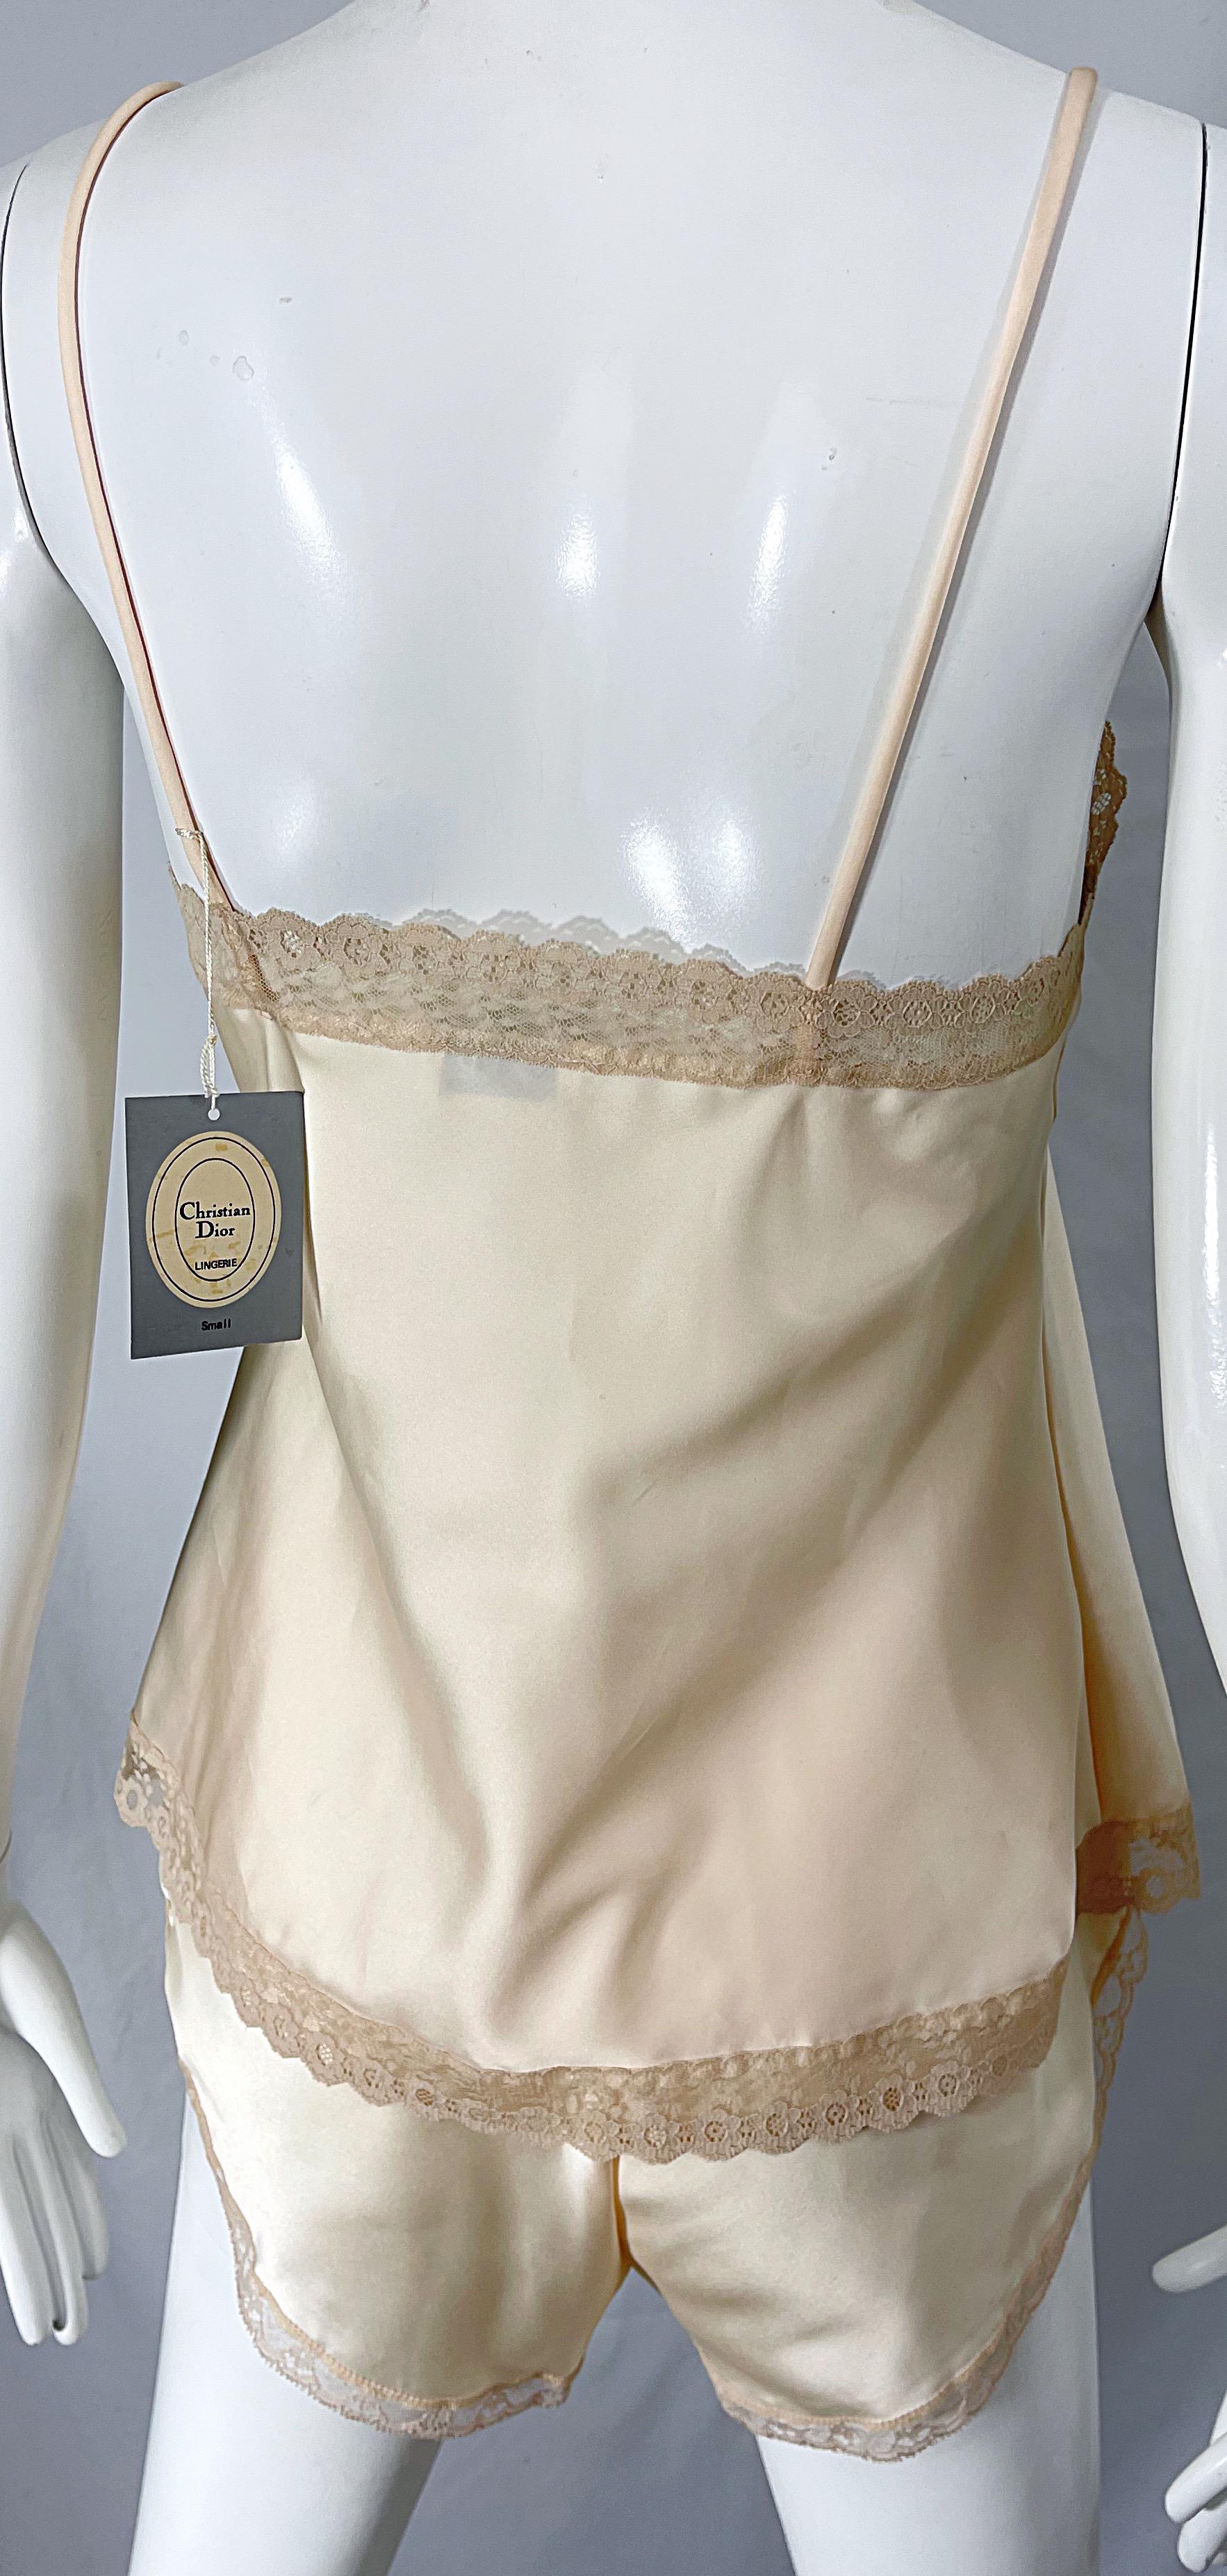 NWT 1980s Christian Dior Ivory Satin Lace Three Piece Cami 80s Lingerie PJ Set  For Sale 7